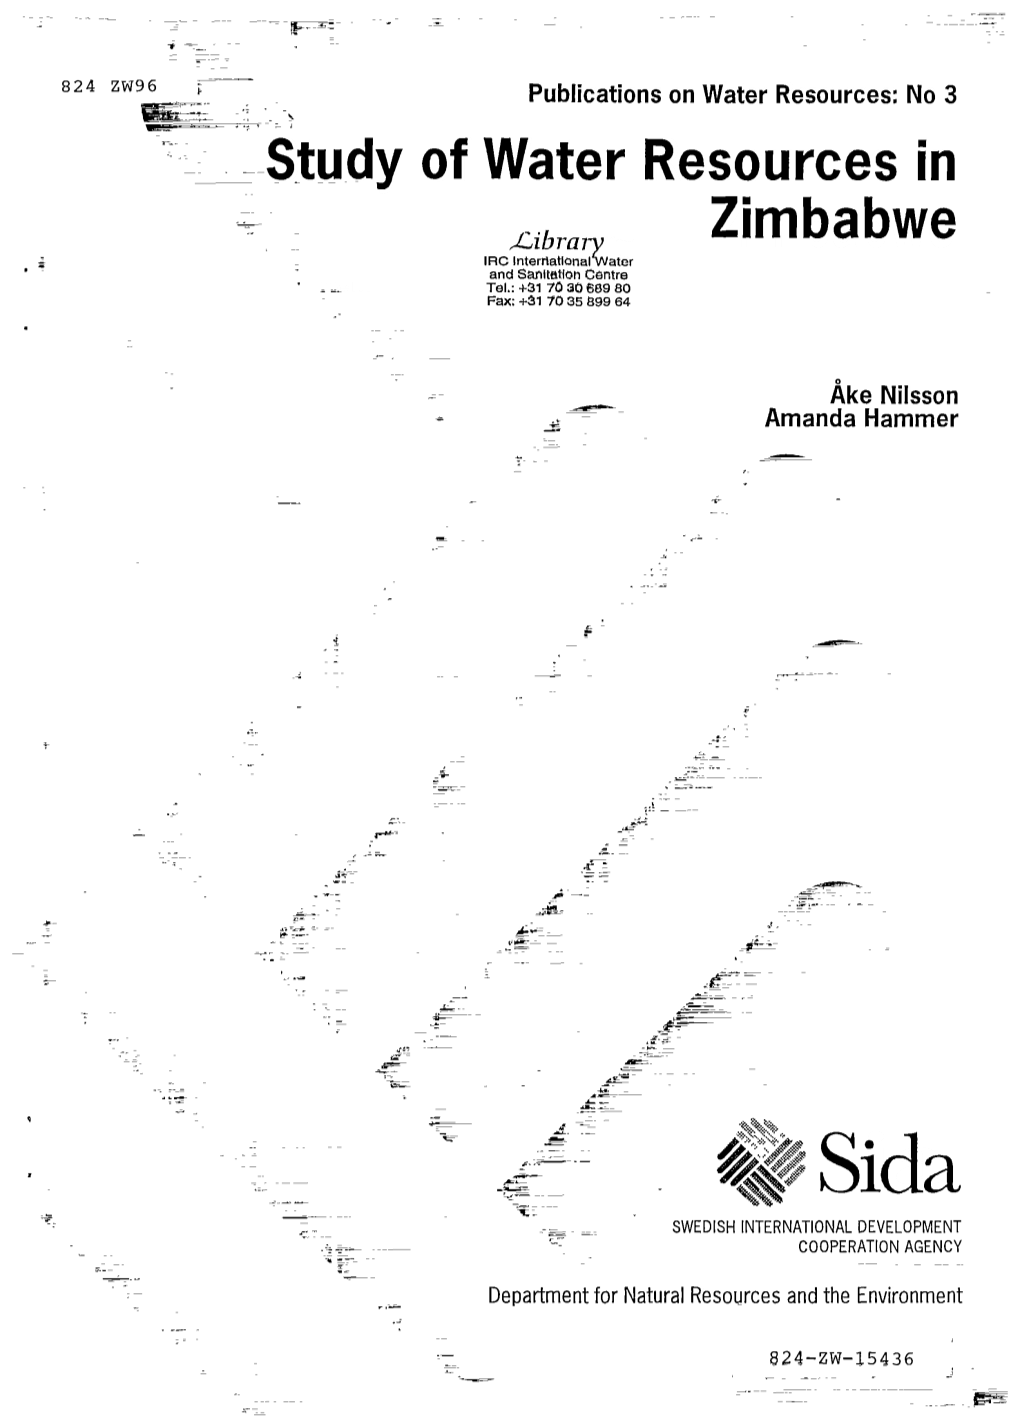 Study of Water Resources in Zimbabwe